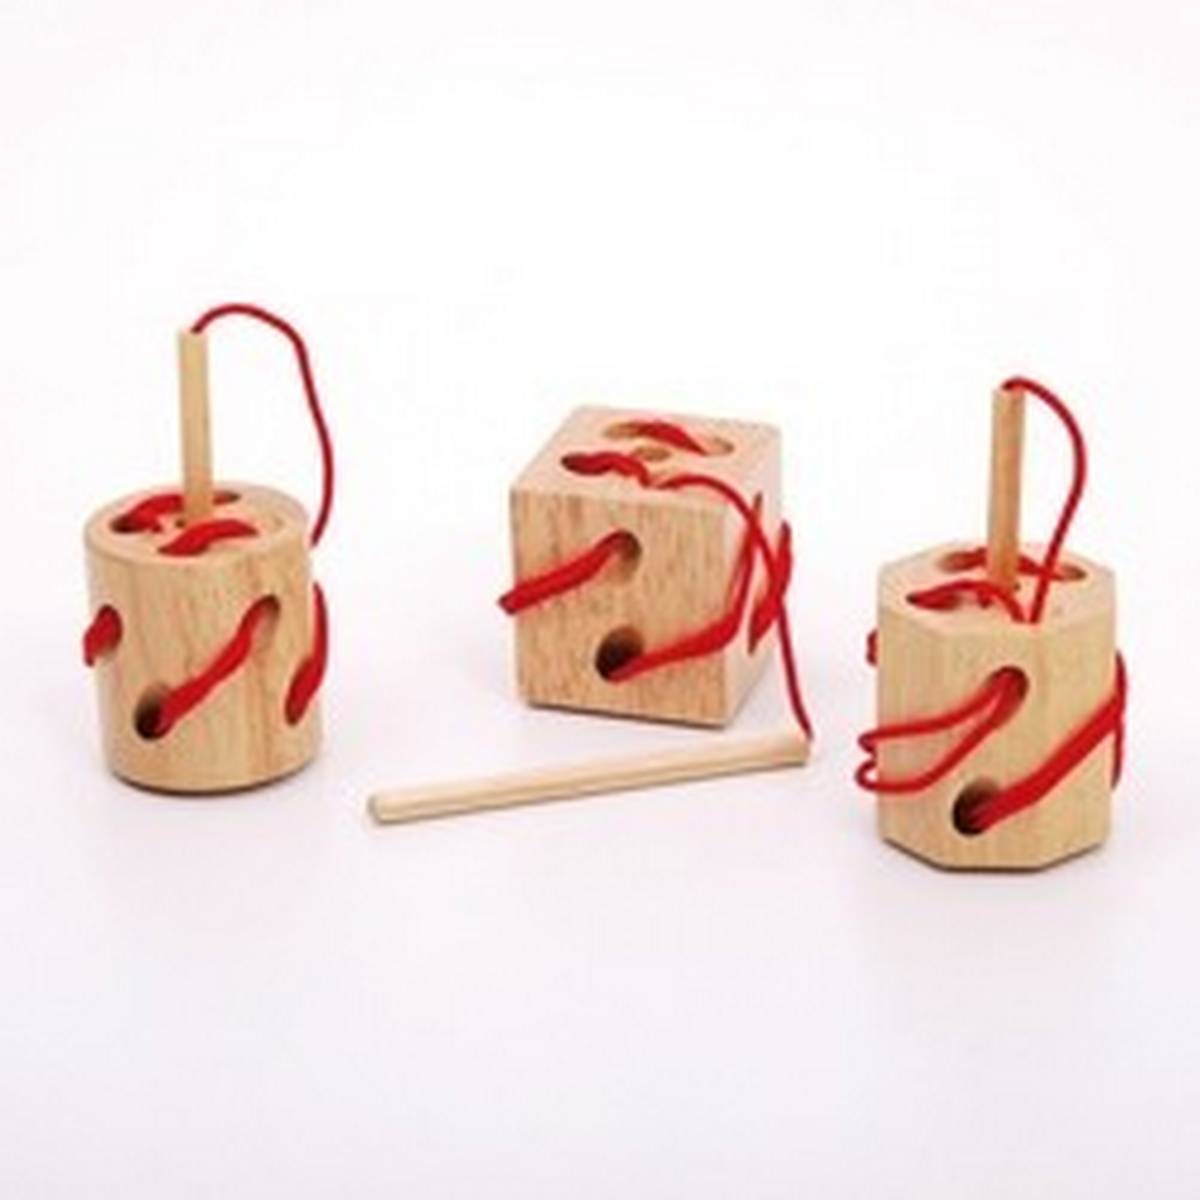 Wooden Sewing Blocks - Pack of 3